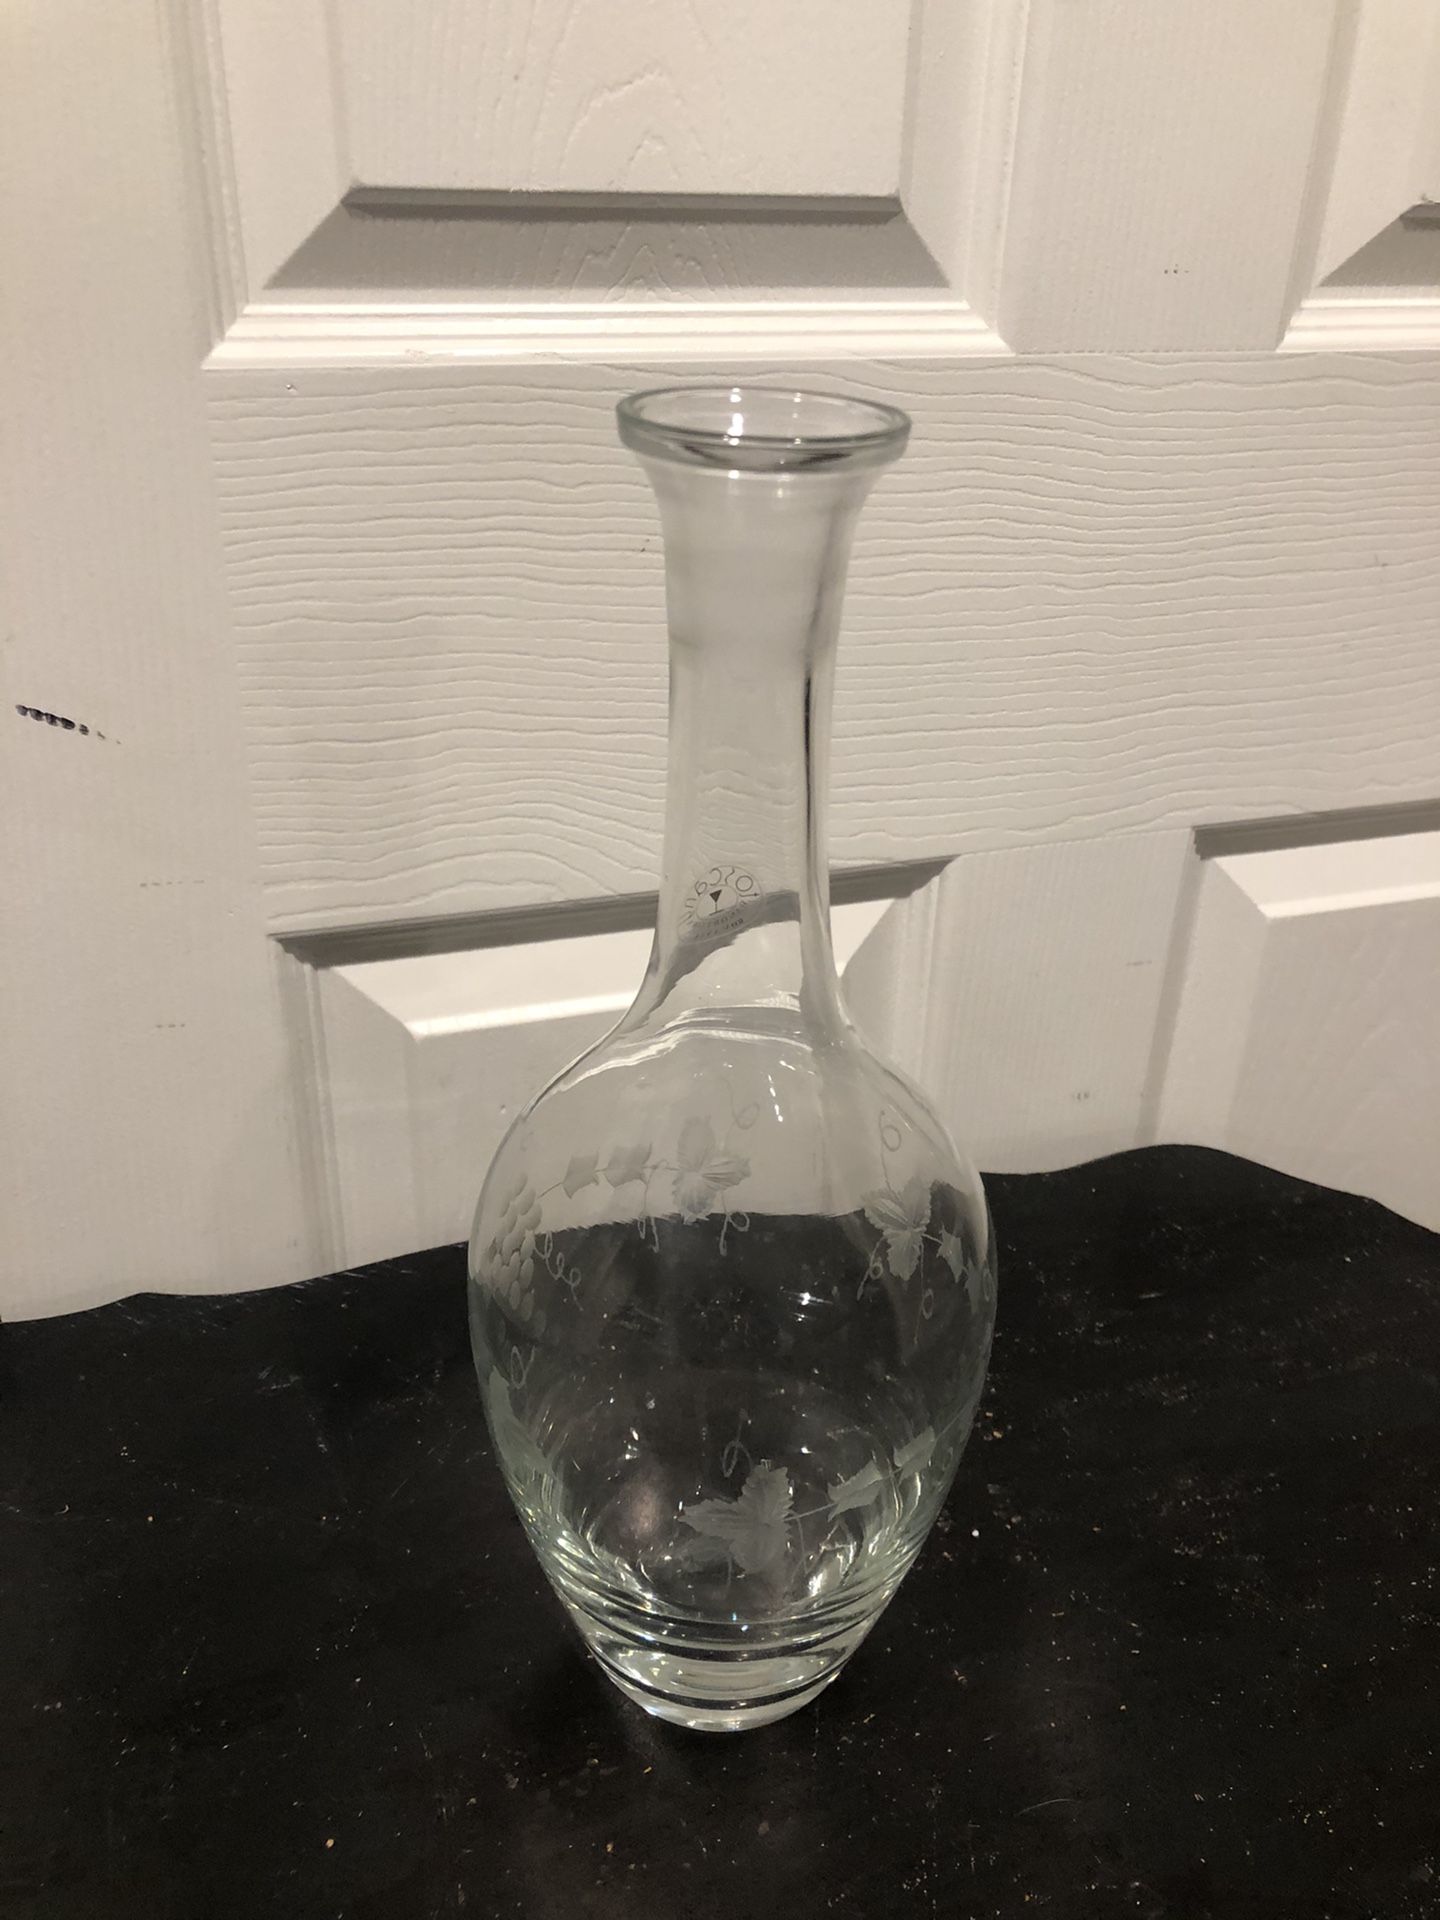 Gorgeous Vintage ‘TOSCANY’ Handblown & Etched Glass Decanter!